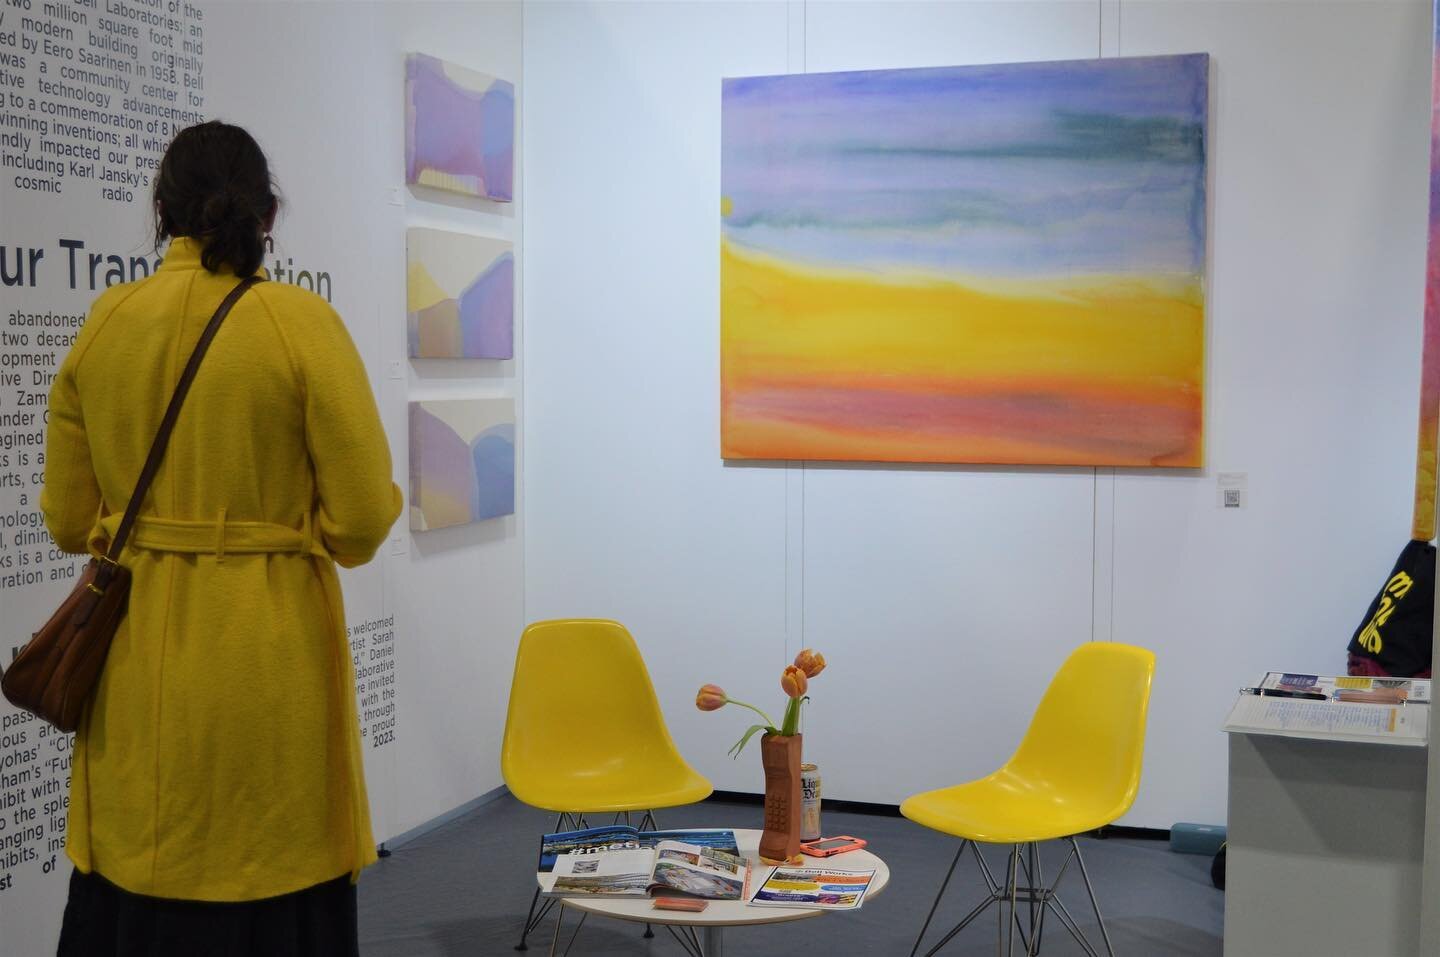 Special moments @artfair14c of guest interacting with the Bell Works booth and my pieces 🌟 

My favorite part about 14C were the meaningful group conversations inside of our booth, in addition to sharing a glass of Prosecco or two!✨ Our booth became